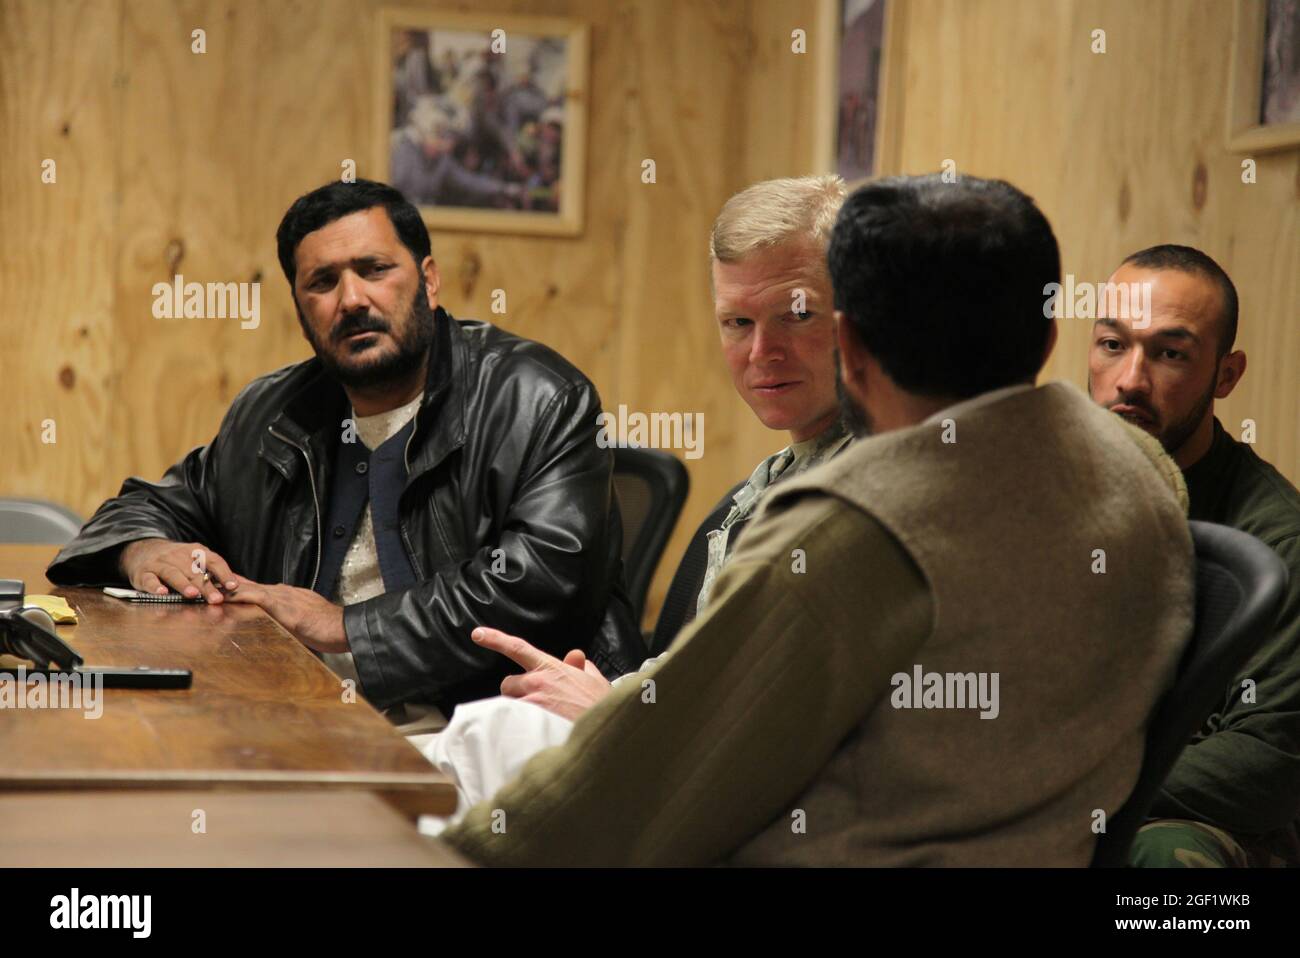 U.S. Army Lt. Col. Frederick O'Donnell is interviewed by Afghan local journalists inside the conference room at Forward Operation Base Joyce, Afghanistan, Dec. 12, 2009. O'Donnell is the commander of 1st Battalion, 32nd Infantry Regiment, 3rd Brigade Combat Team, 10th Mountain Division. Stock Photo